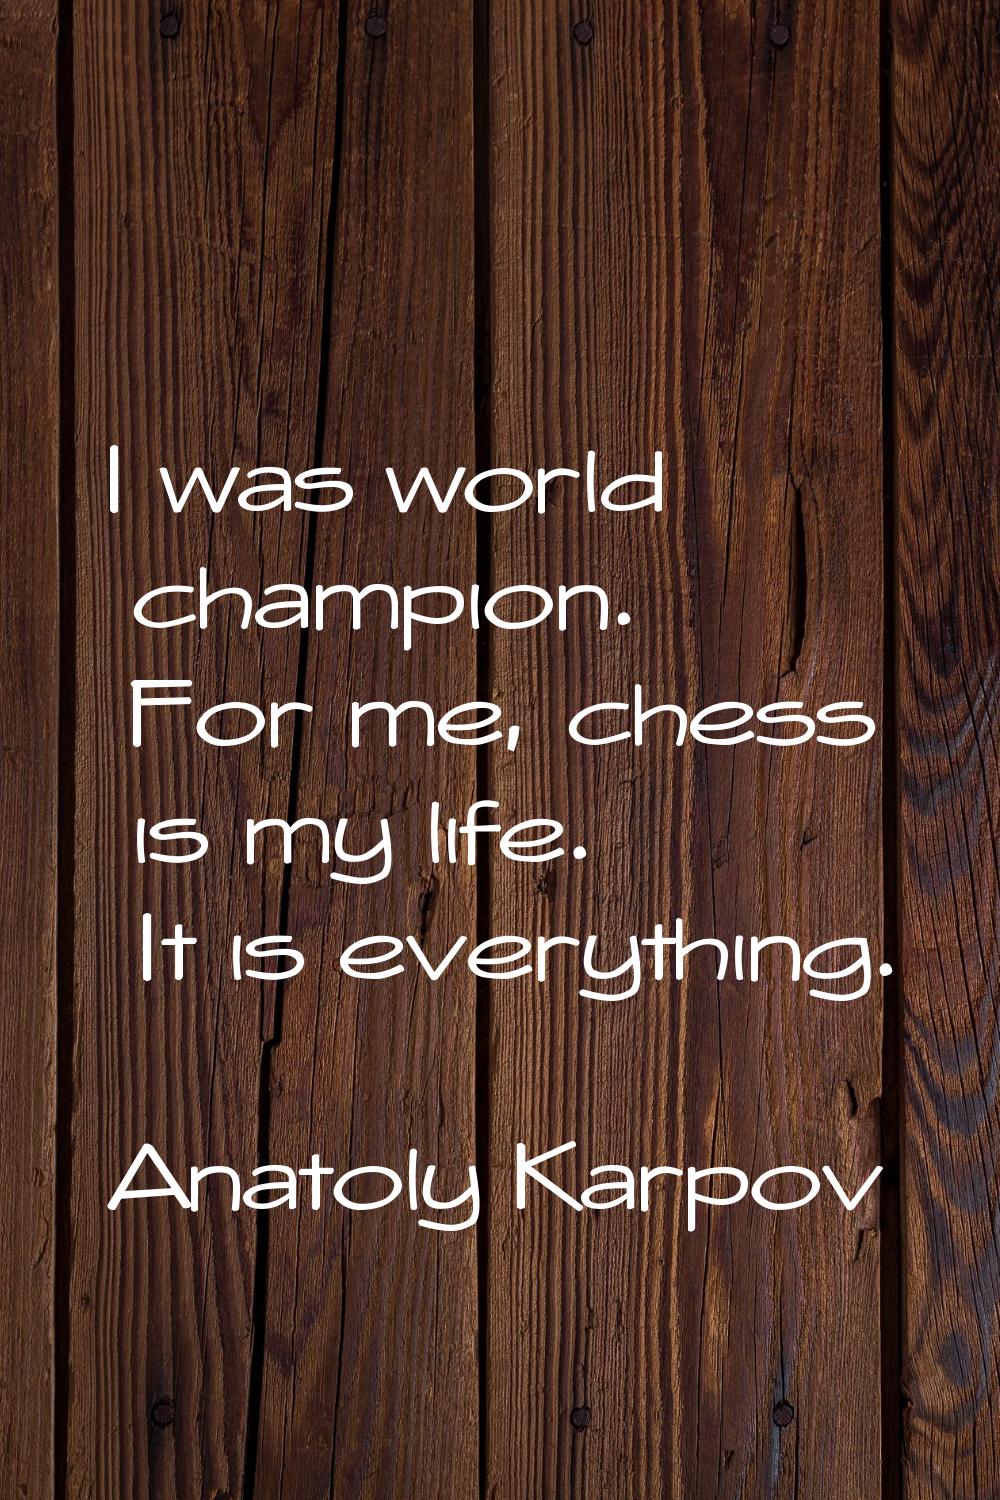 I was world champion. For me, chess is my life. It is everything.